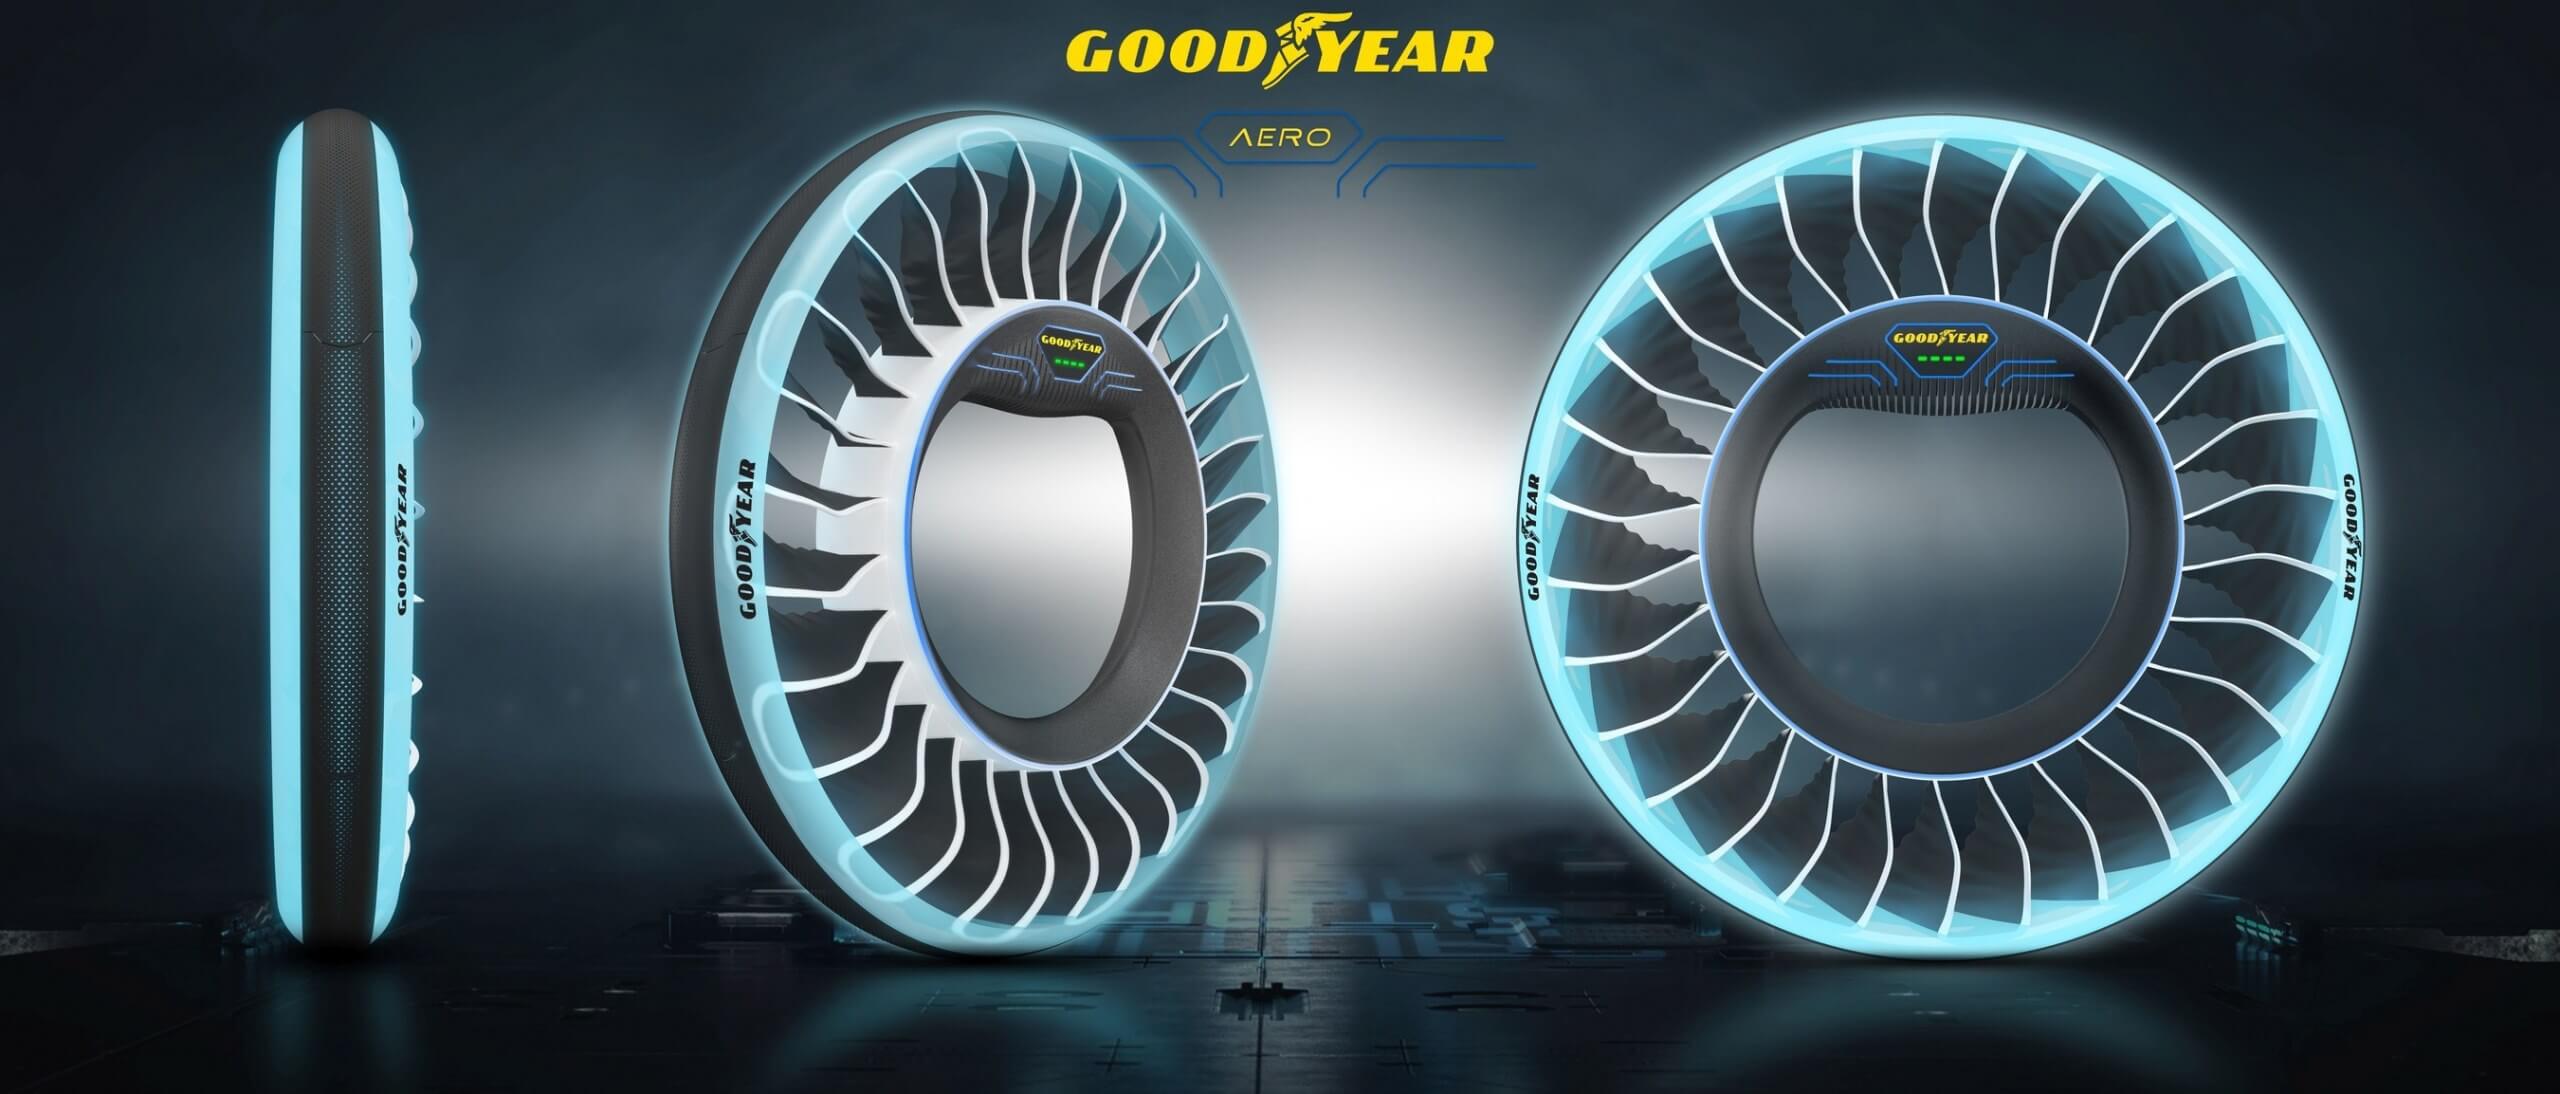 Goodyear's Aero concept tire lets autonomous flying cars move seamlessly from ground to air